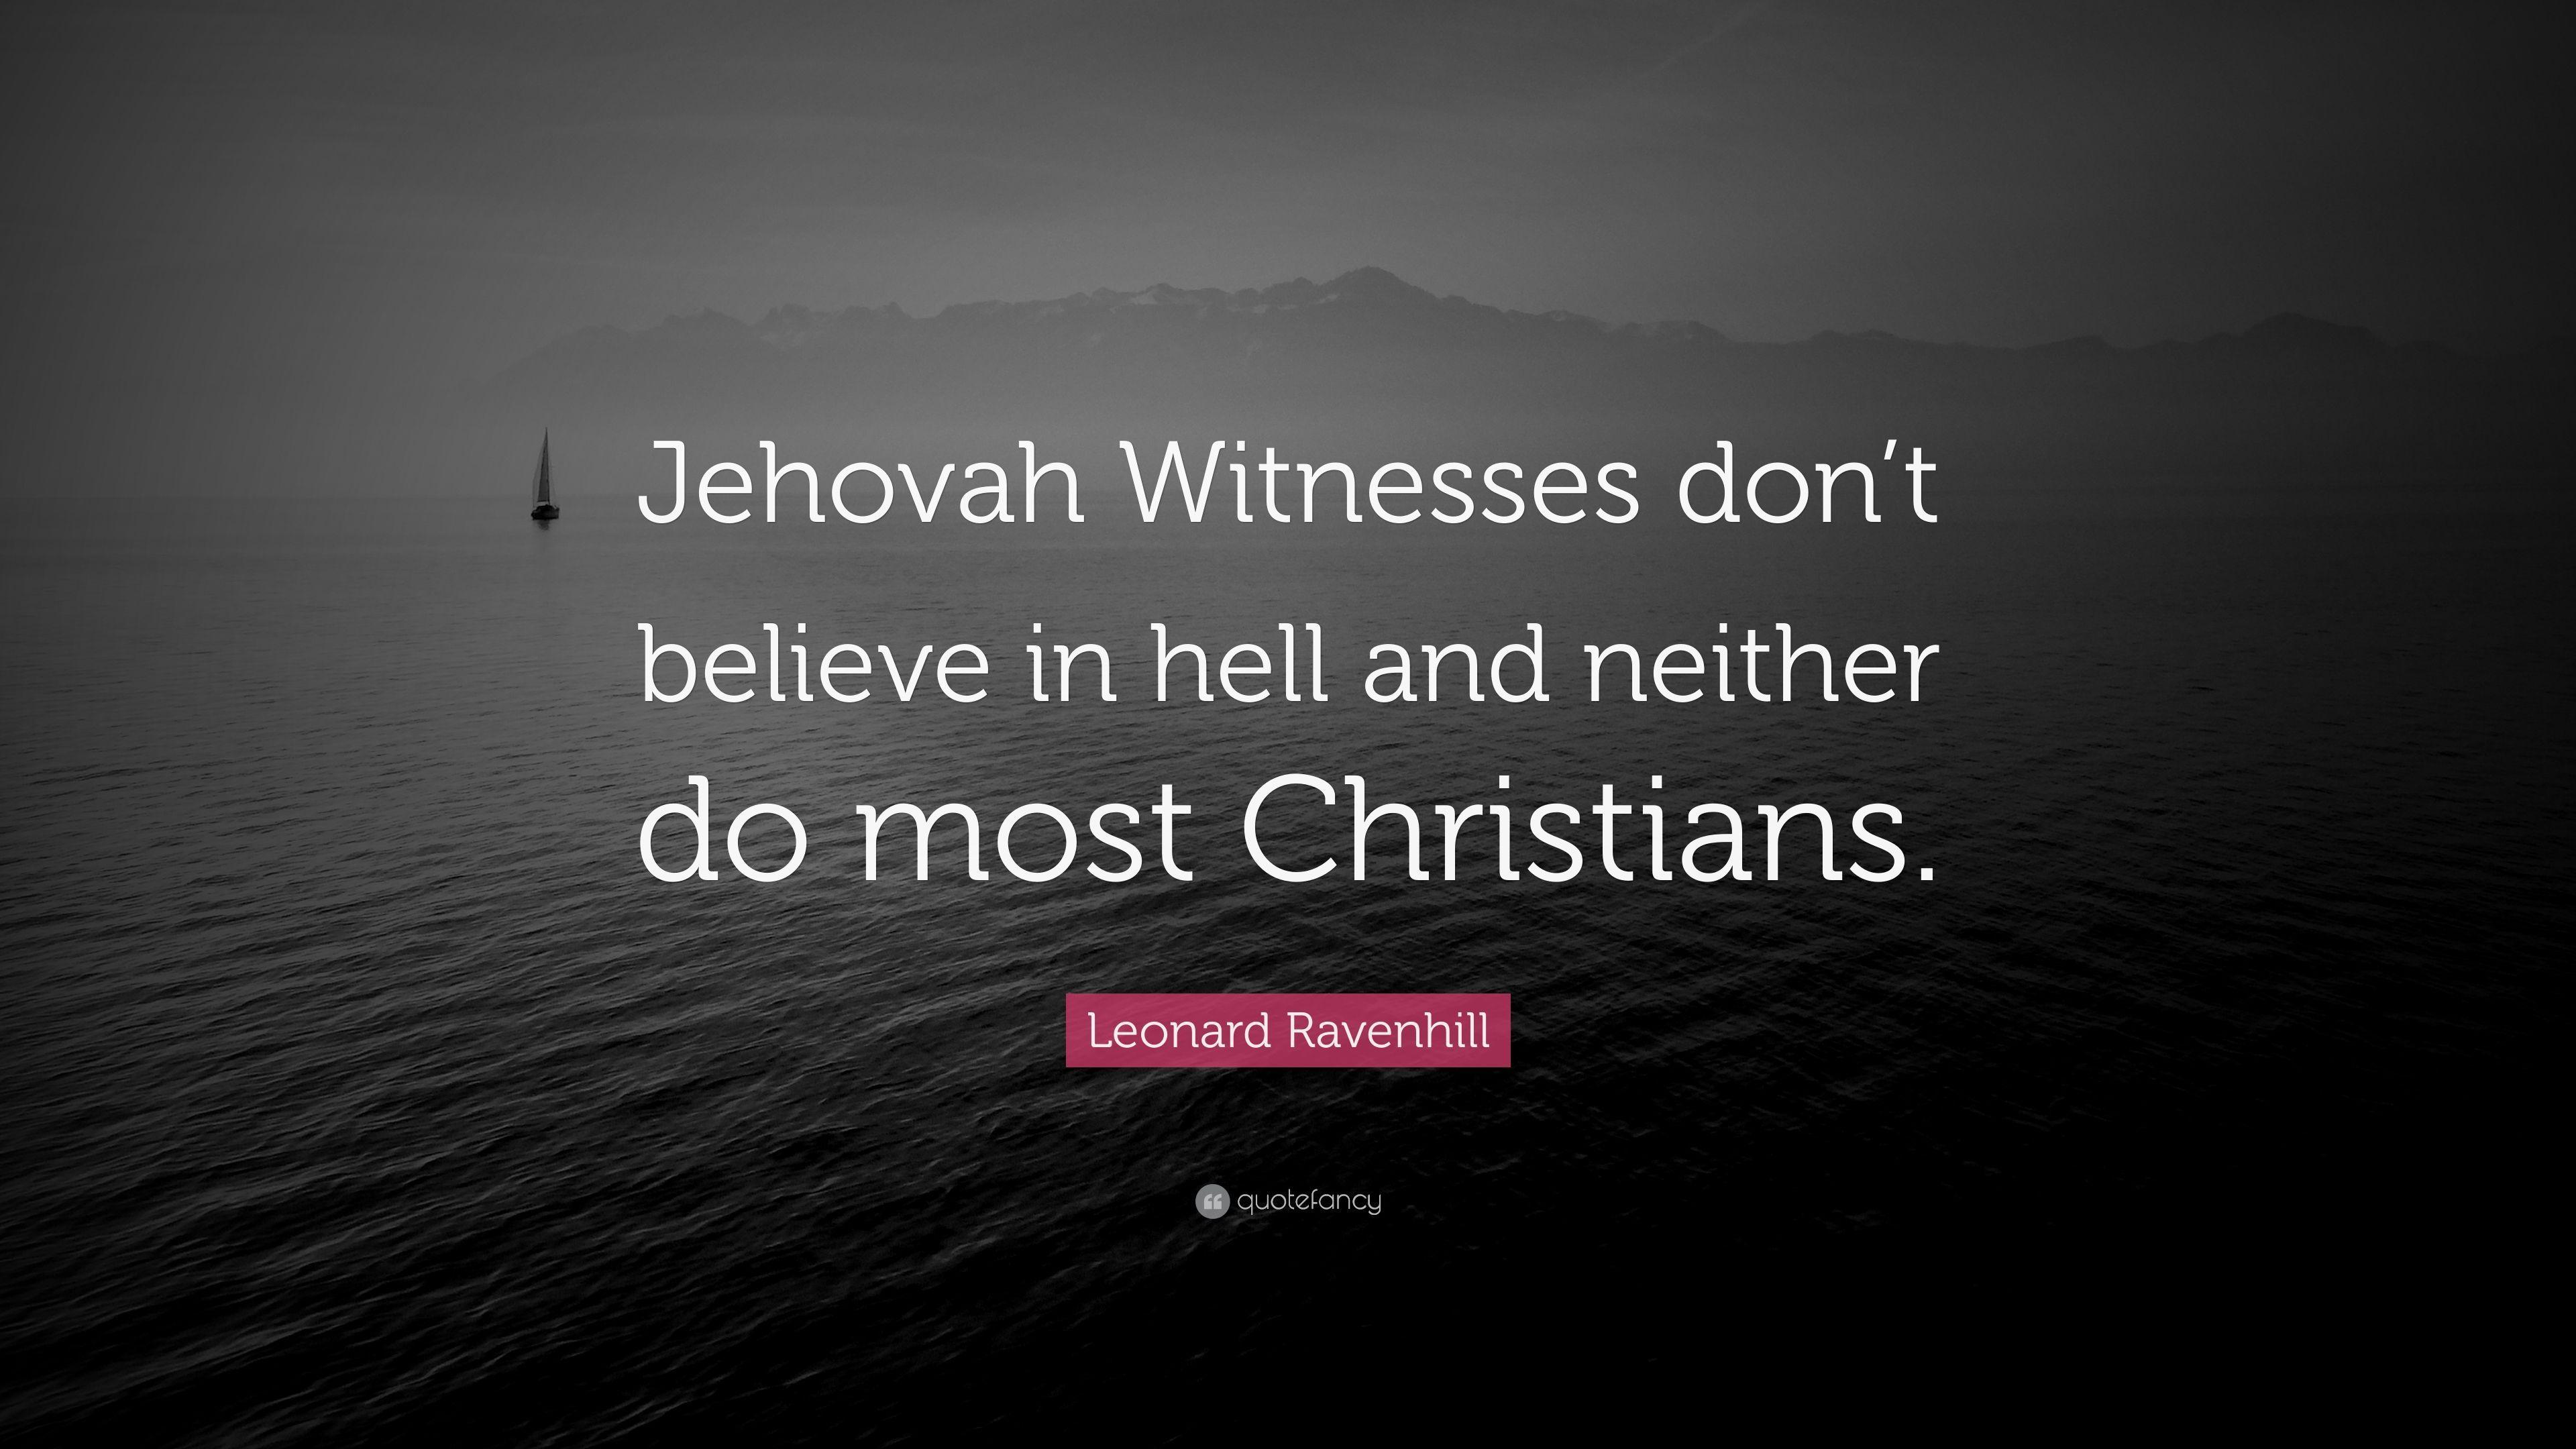 Leonard Ravenhill Quote: “Jehovah Witnesses don't believe in hell